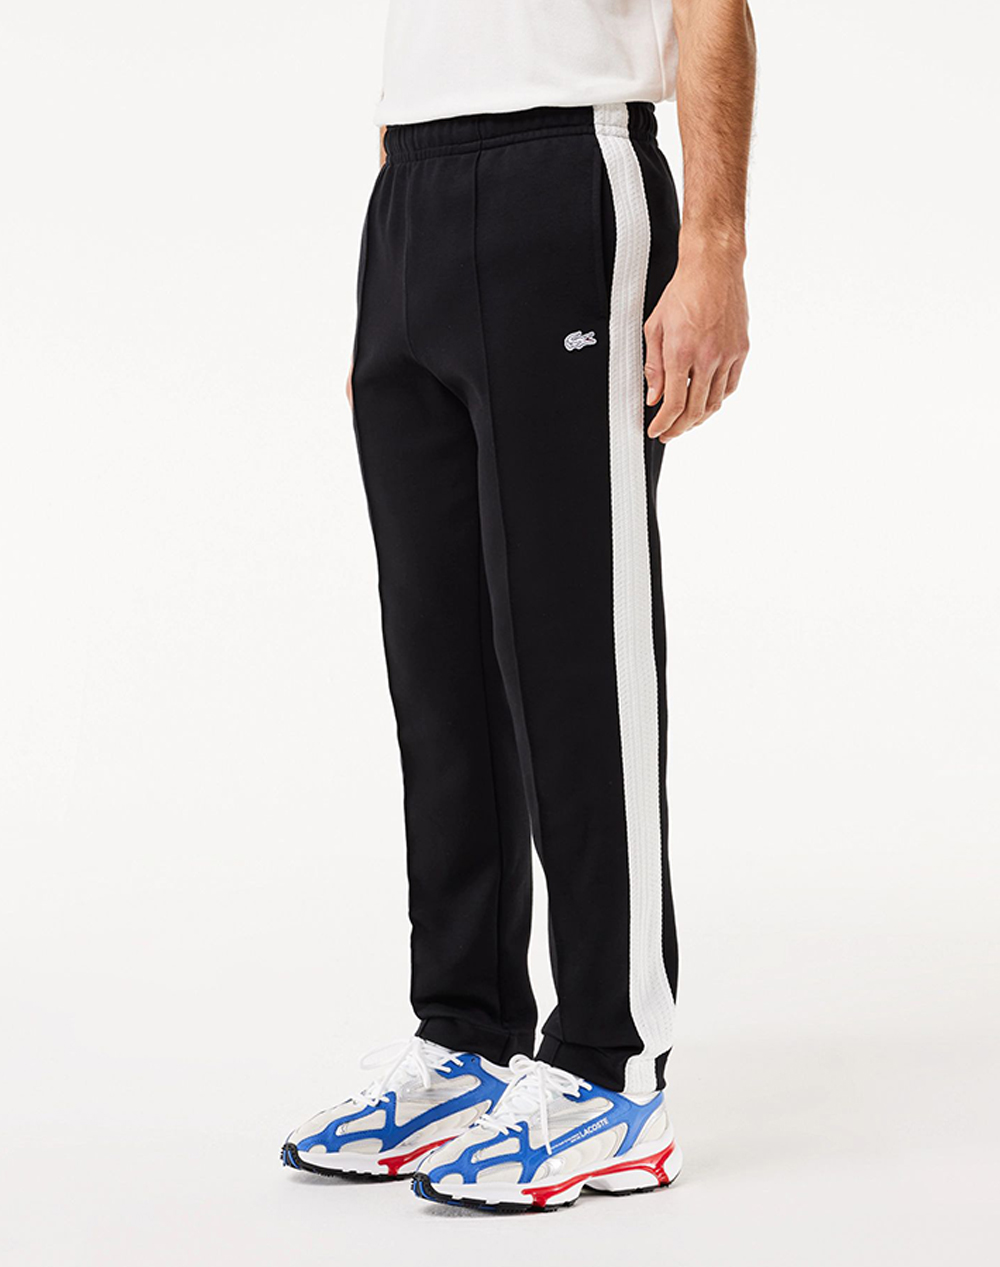 LACOSTE ΠΑΝΤΕΛΟΝΙ ΦΟΡΜΑΣ TRACKSUIT TROUSERS 3XH7450-9M0 Black 3820BLACO2040027_XR29988